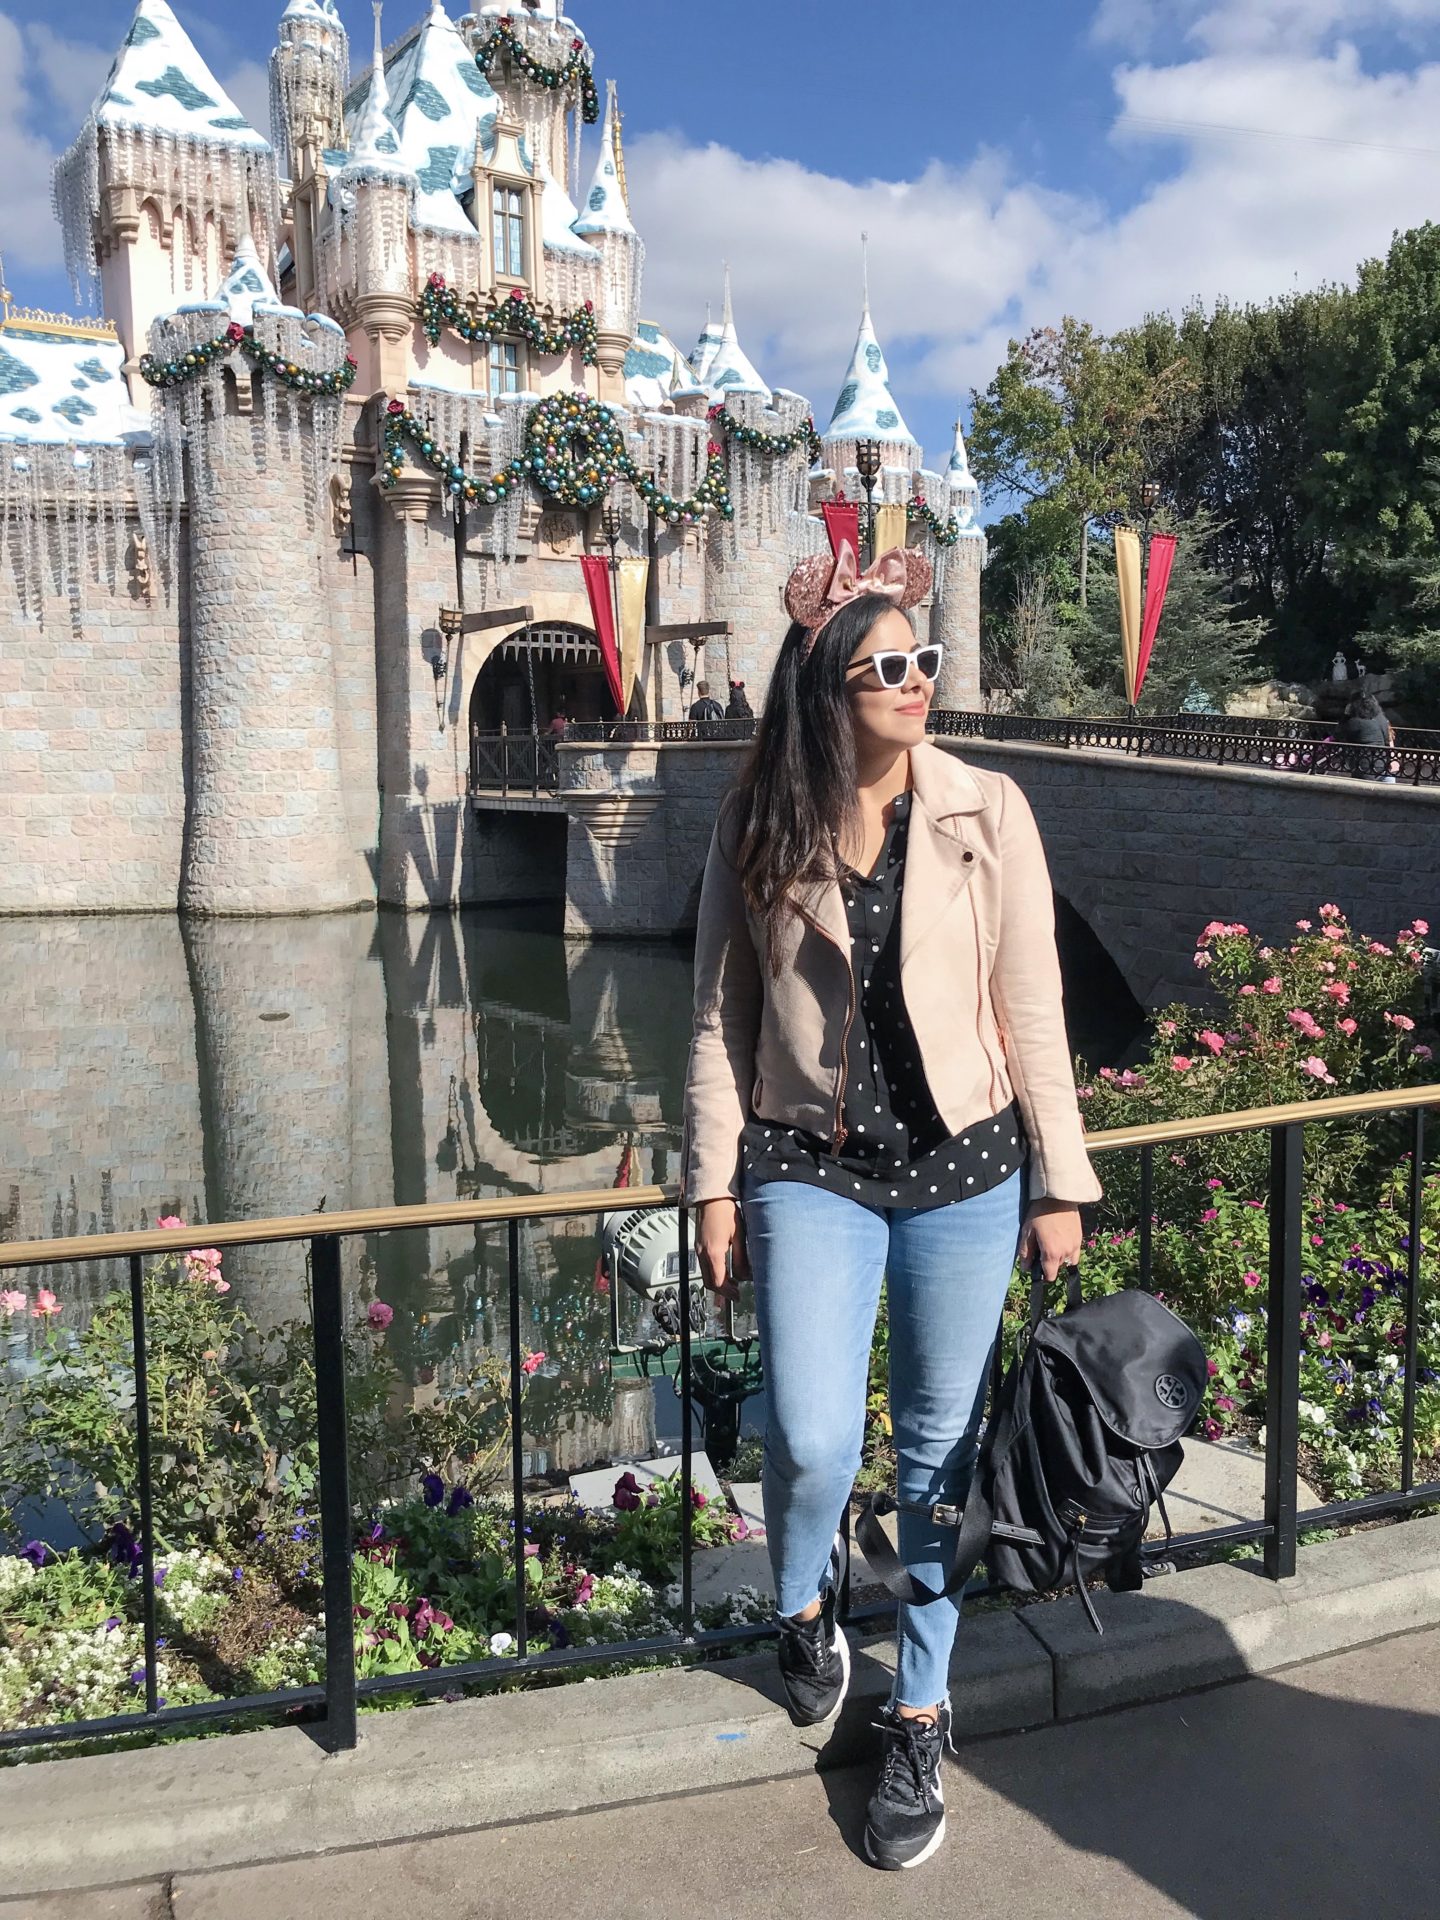 Christmas Cinderella Castle, what to wear to Disneyland during the Holidays